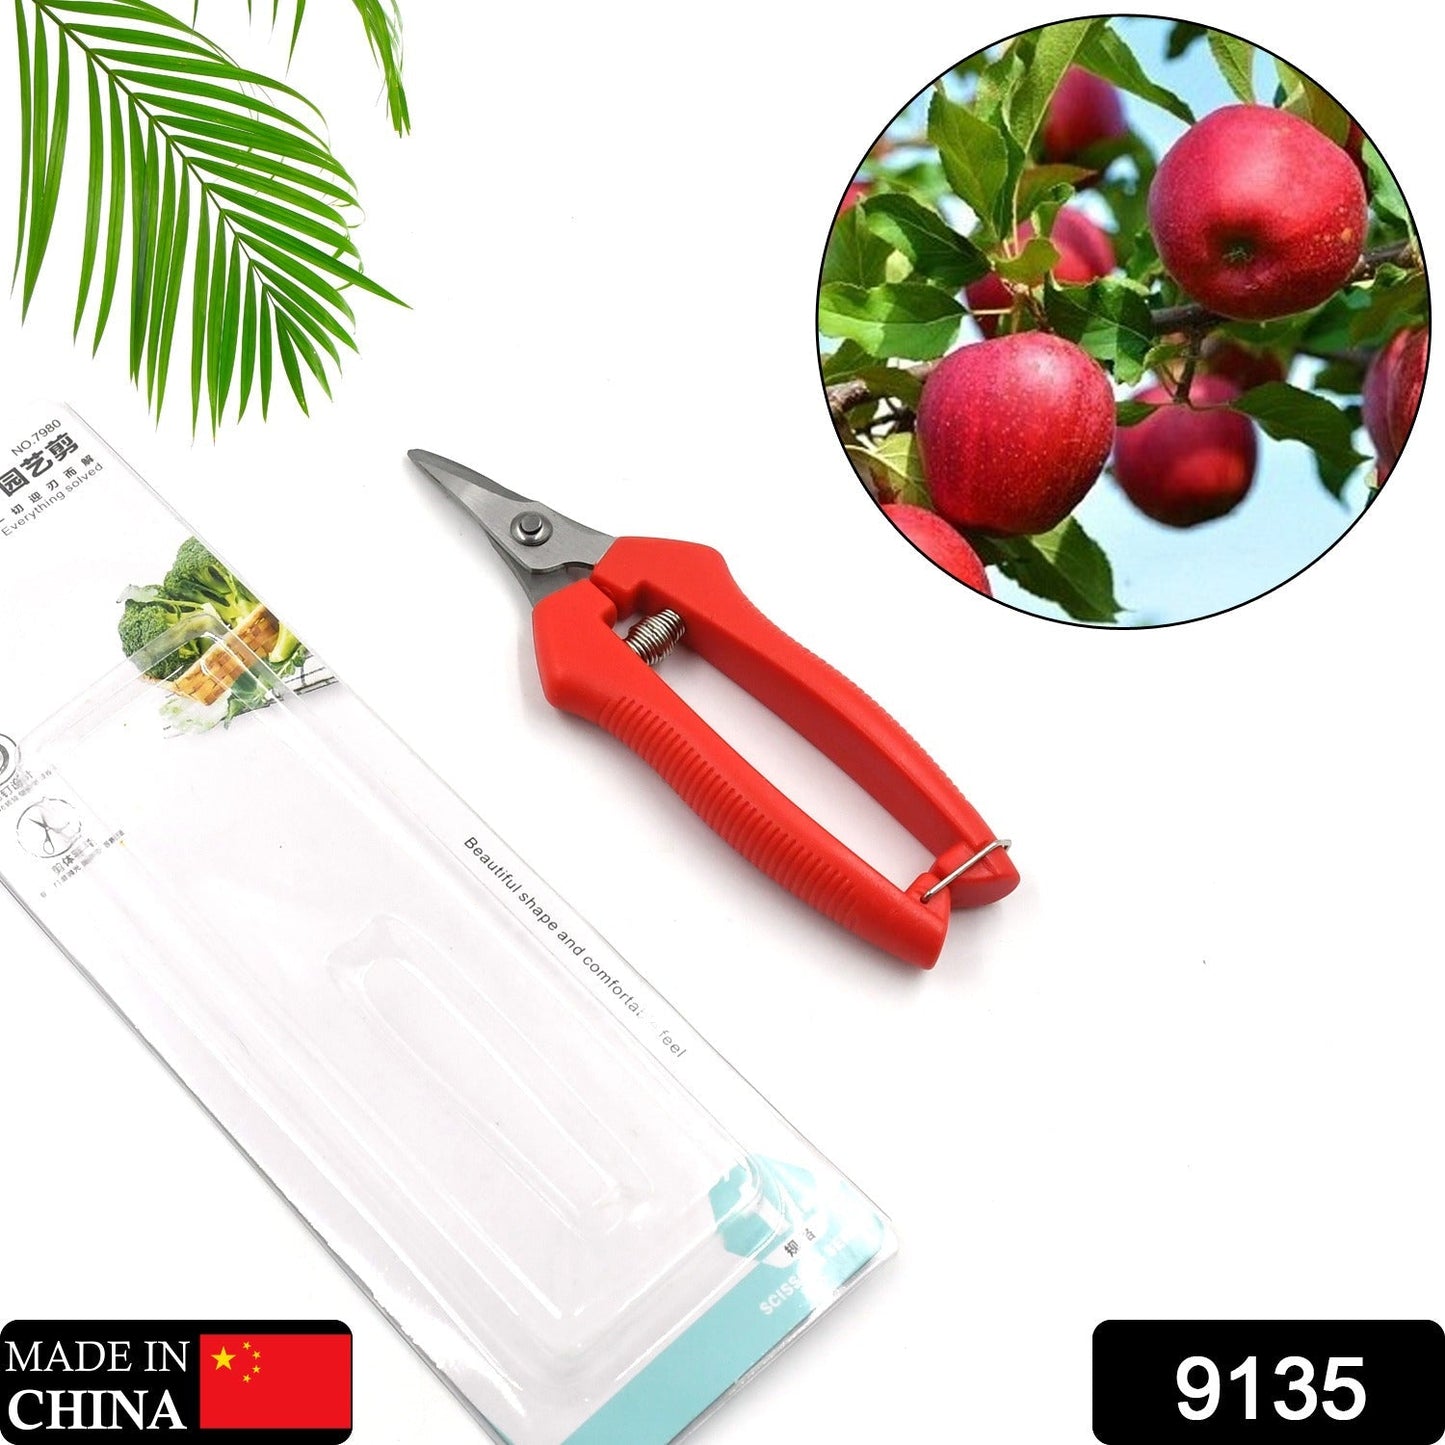 Heavy Duty Stainless Steel Cutter, Non‑slip Trimming Scissors Durable Not Easy To Wear for Gardening Pruning Of Fruit Trees Flowers and Plants